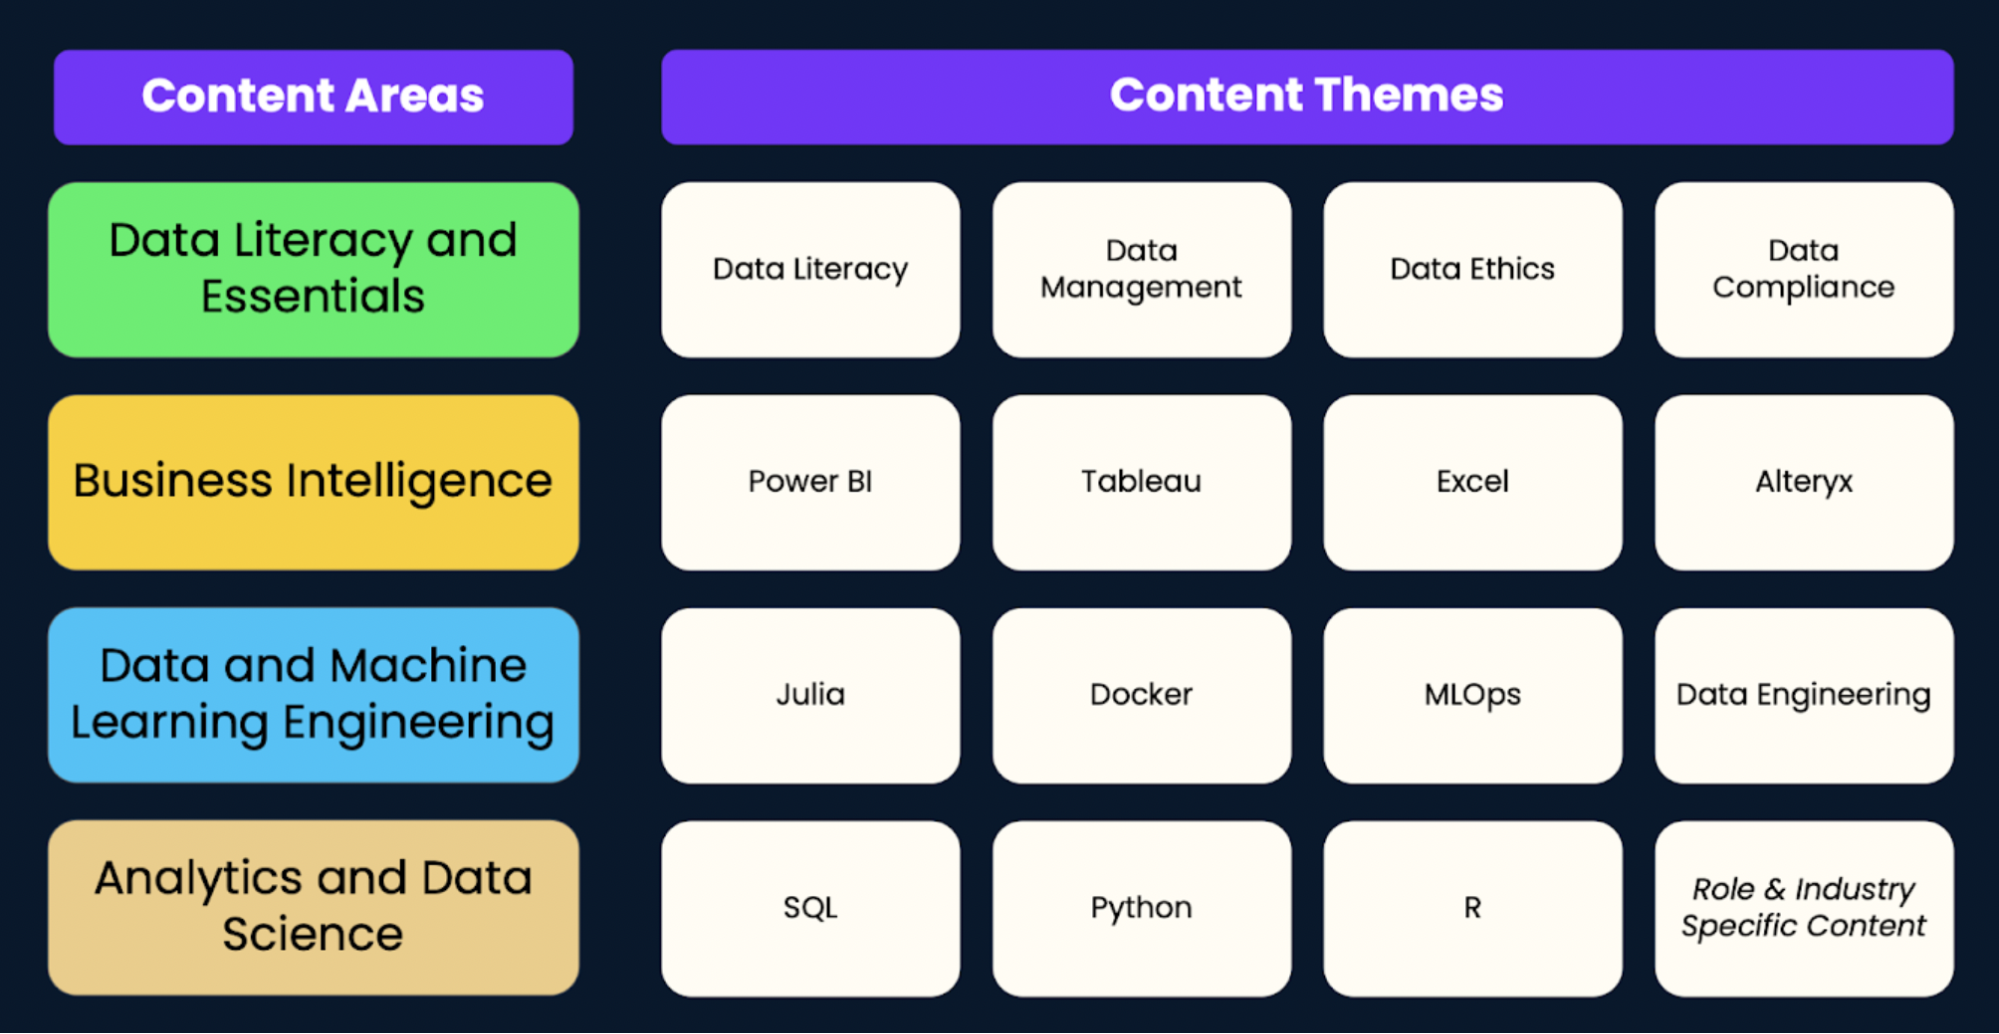 Content Areas and Themes